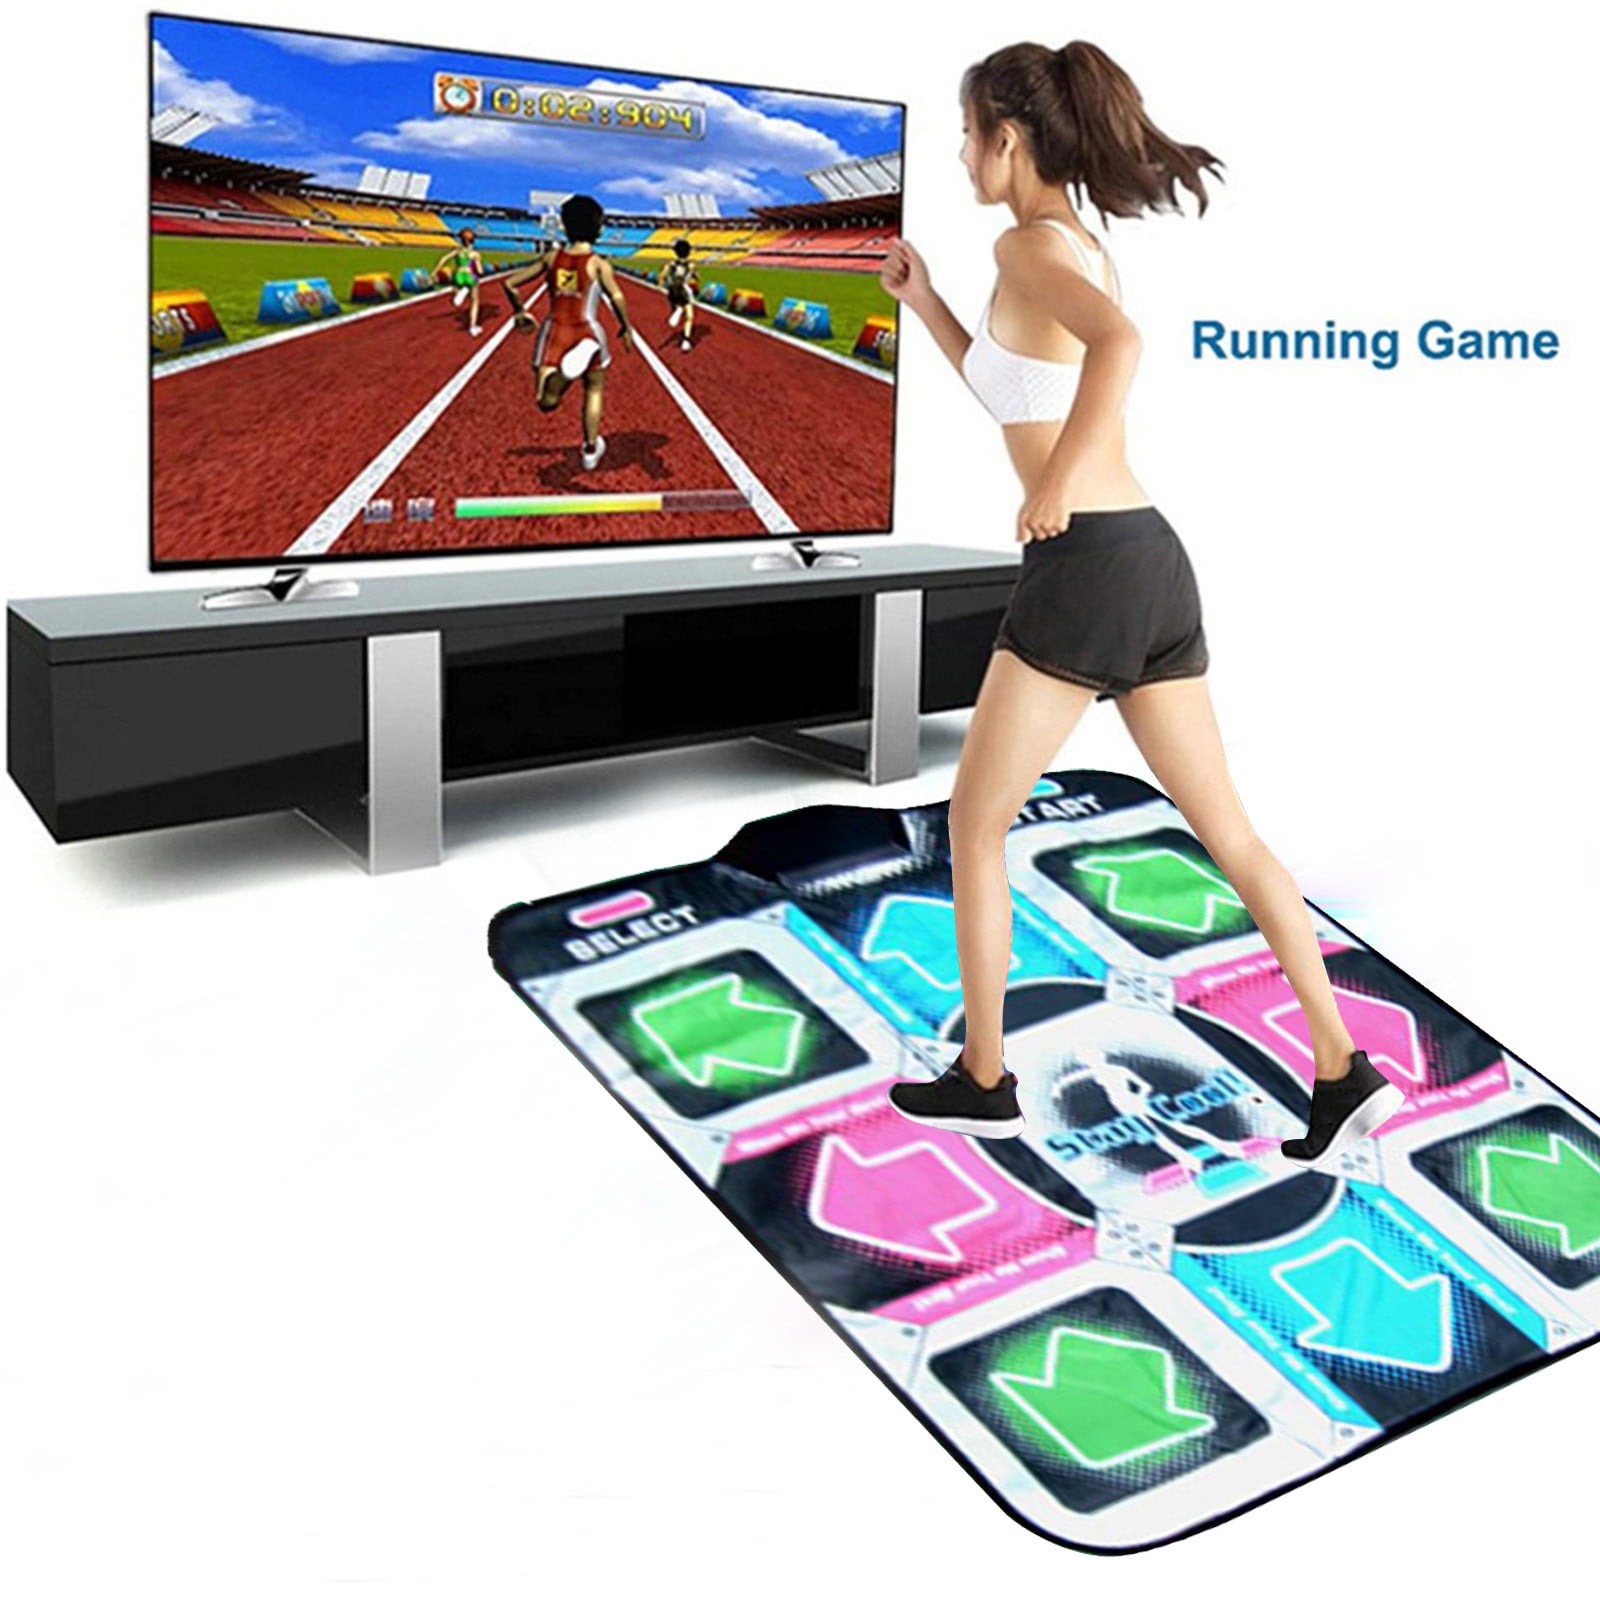 Sense Game for PC TV 2 Person HONGER Double User Dance Mat for Kids Adults Wireless Non-Slip Somatosensory Soft Dancer Step Pads with Music High Sensitivity Multi-Function Games Levels 